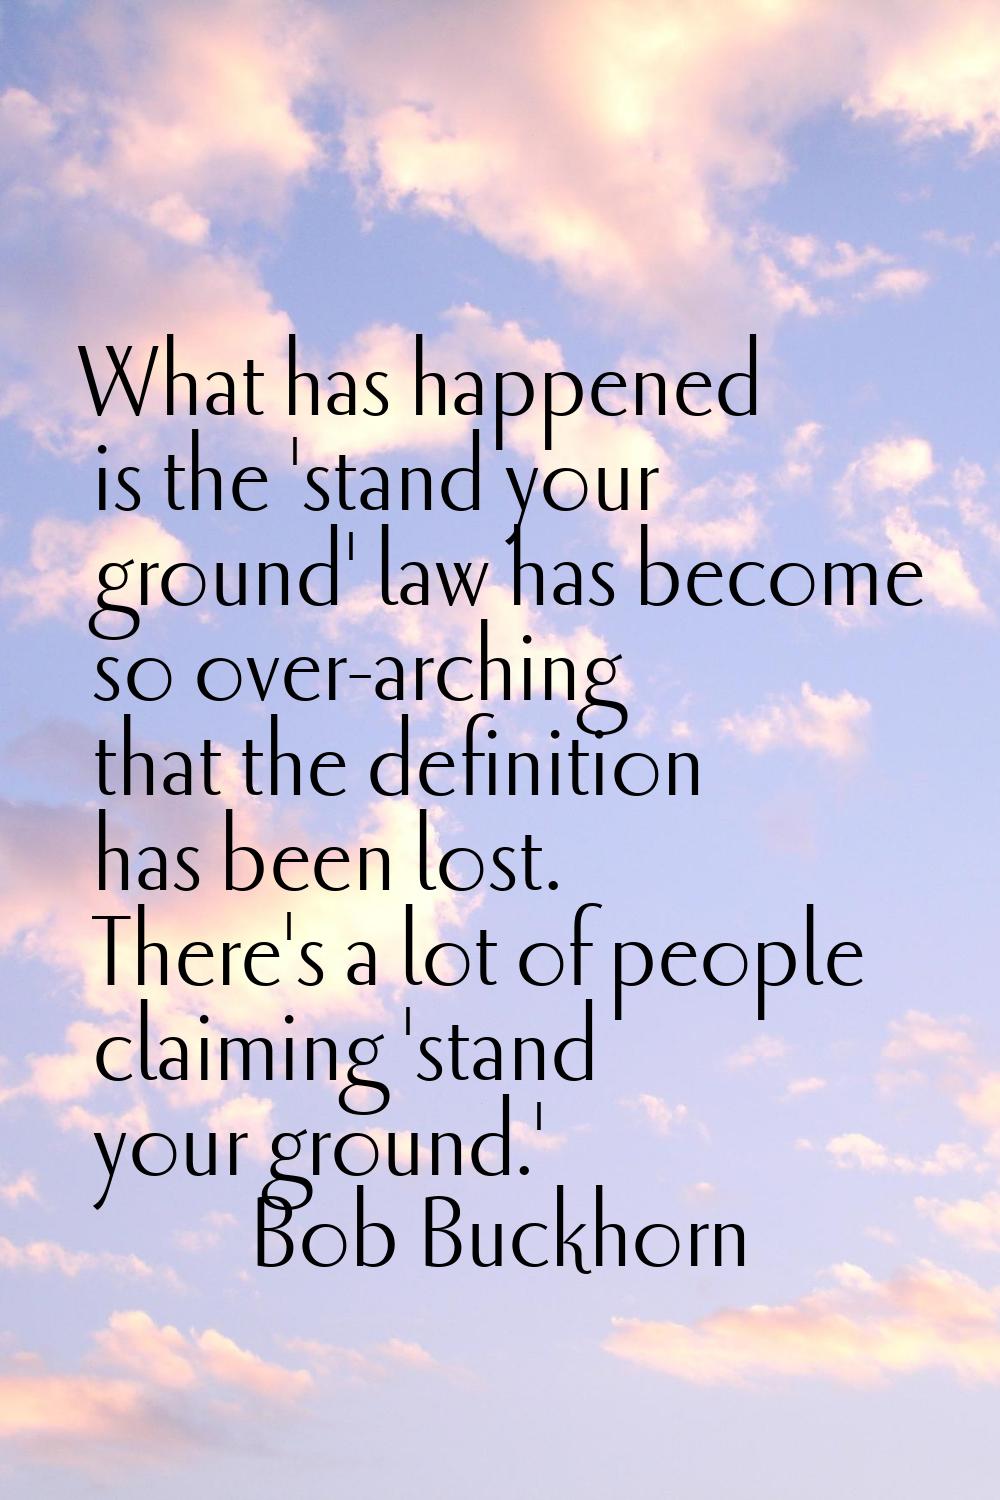 What has happened is the 'stand your ground' law has become so over-arching that the definition has